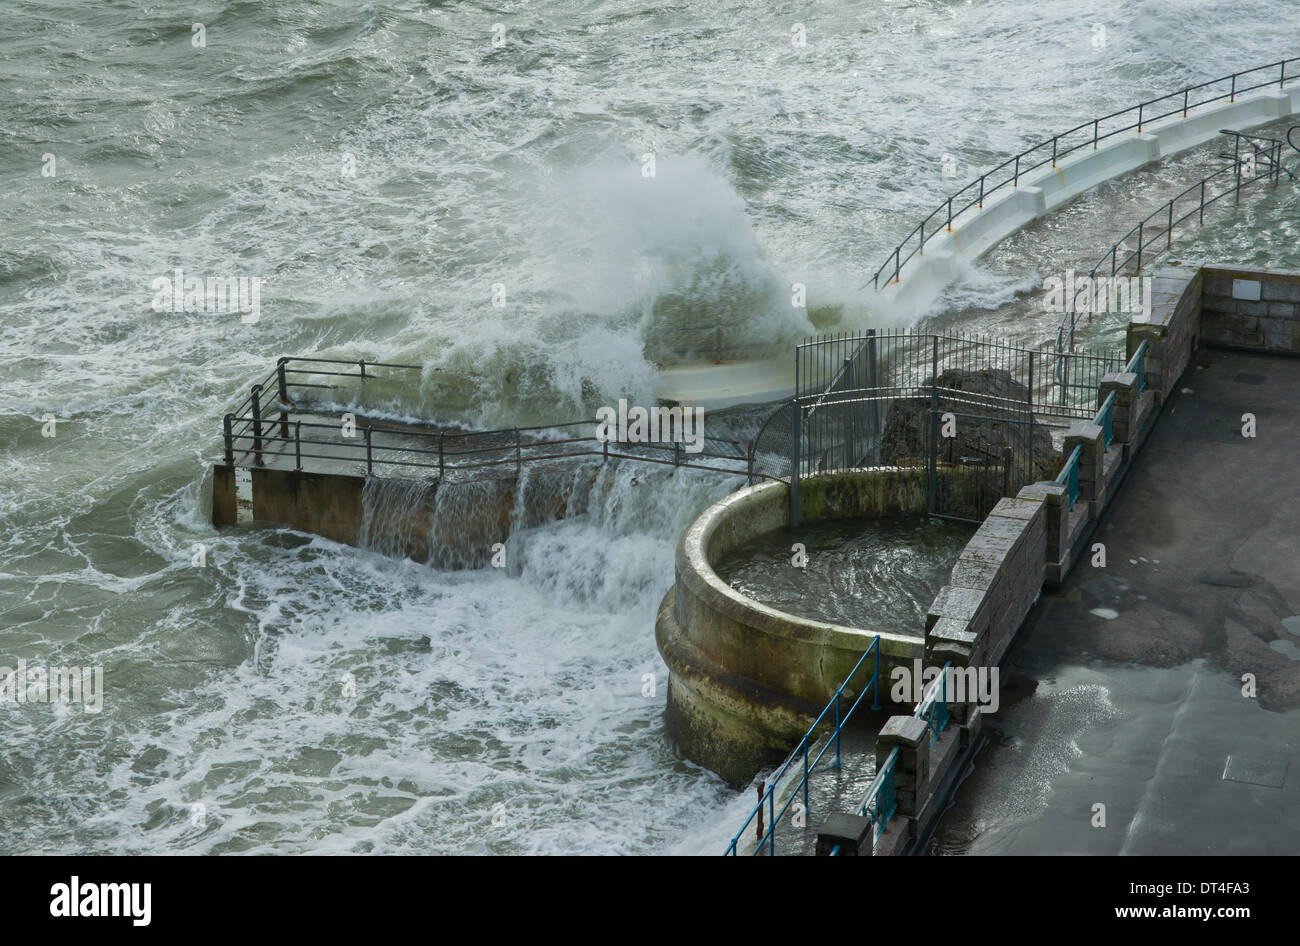 Plymouth, Devon, UK. 8th February 2014. Strong winds and high tides create giant waves and choppy seas, Plymouth Hoe, Devon, England 8th February 2014 Credit:  Anna Stevenson/Alamy Live News Stock Photo